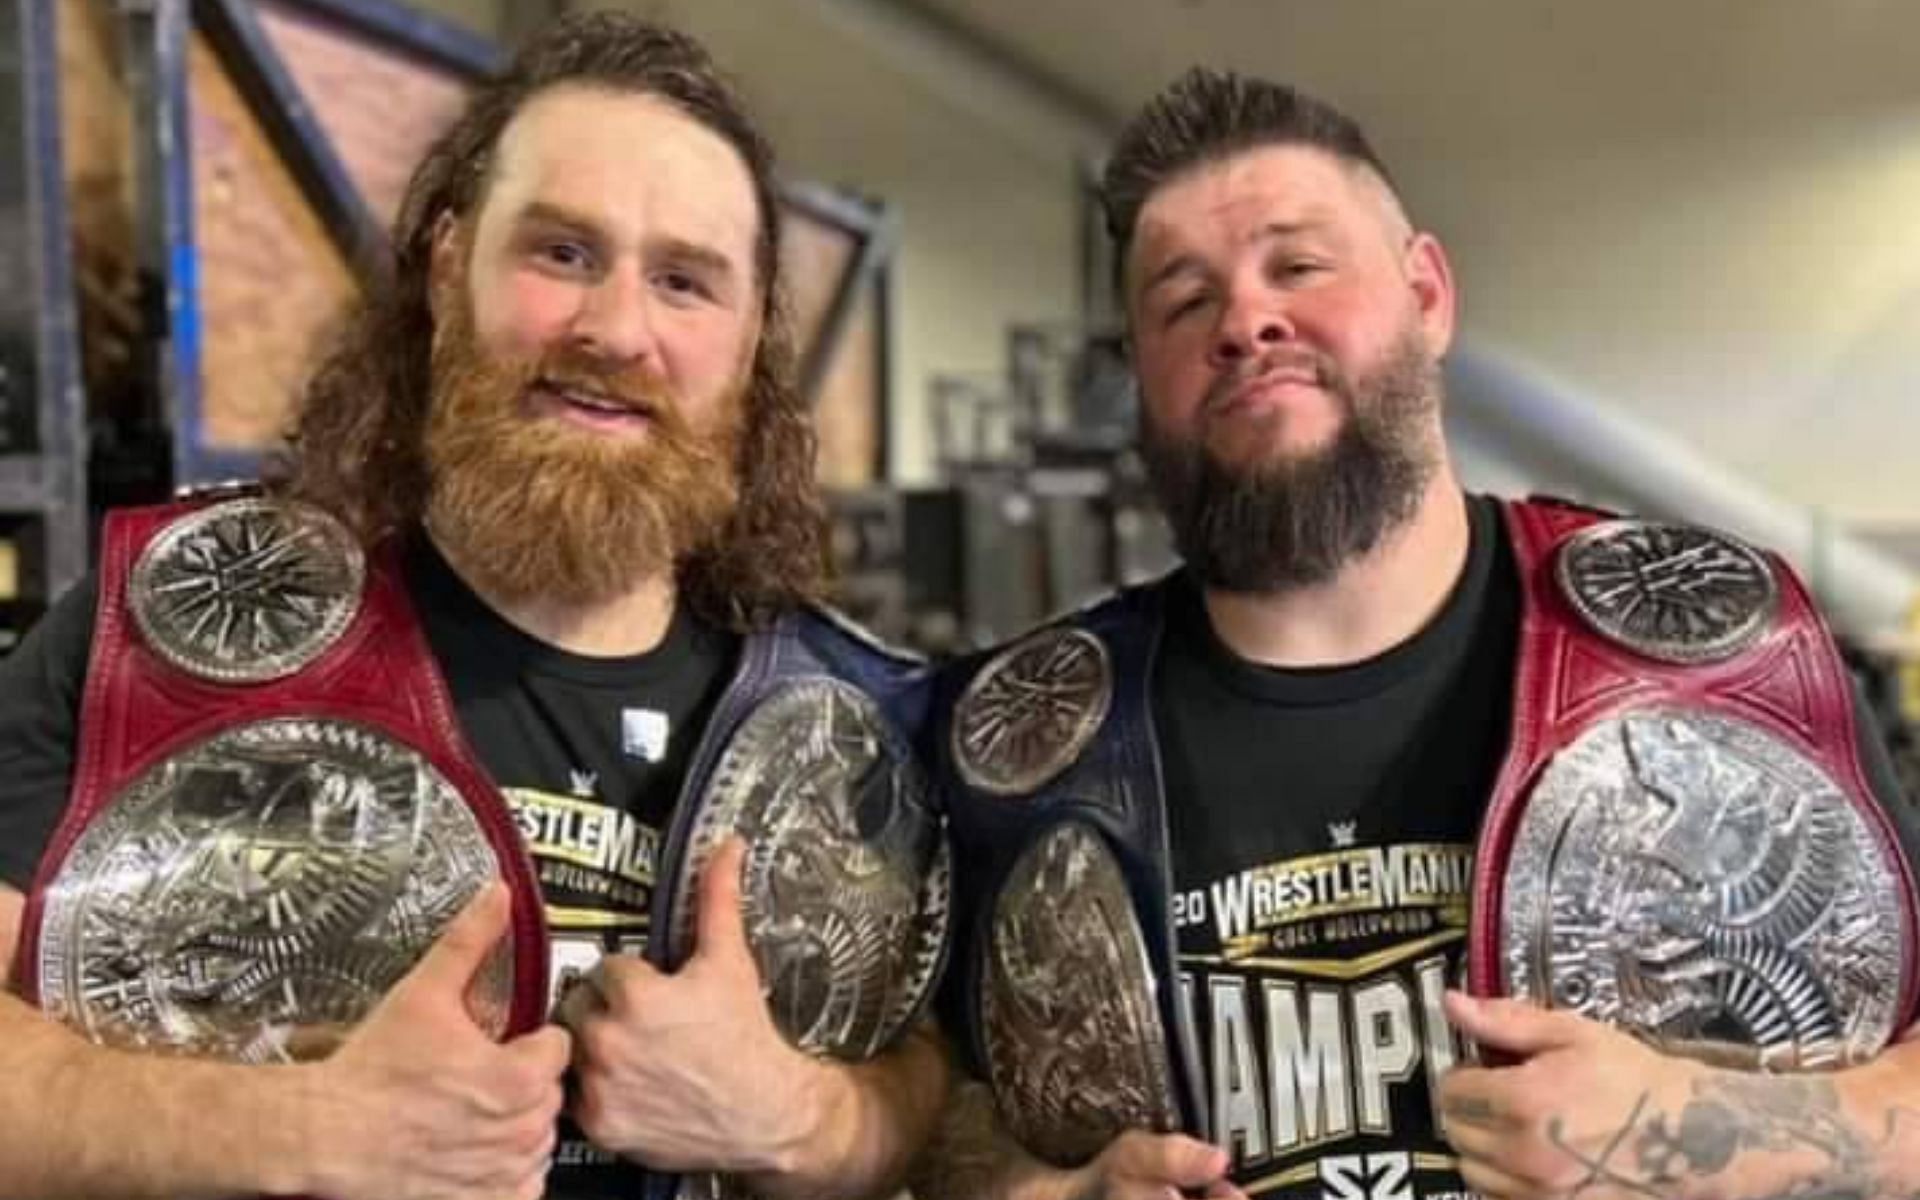 The new Undisputed Tag Team Champions of WWE